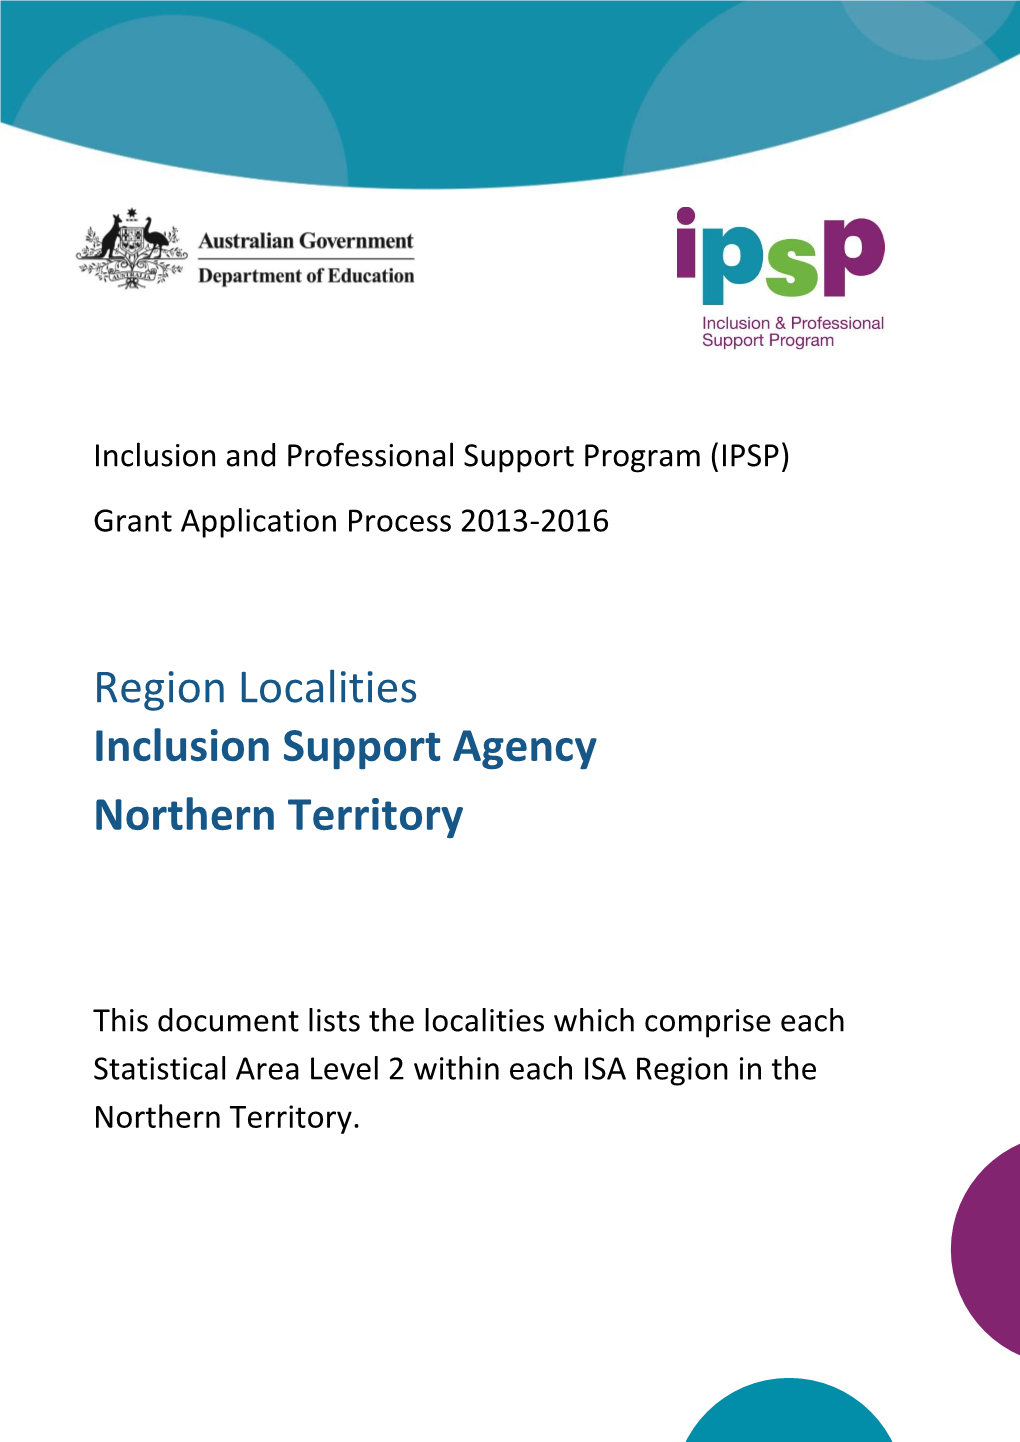 Region Localities Inclusion Support Agency Northern Territory